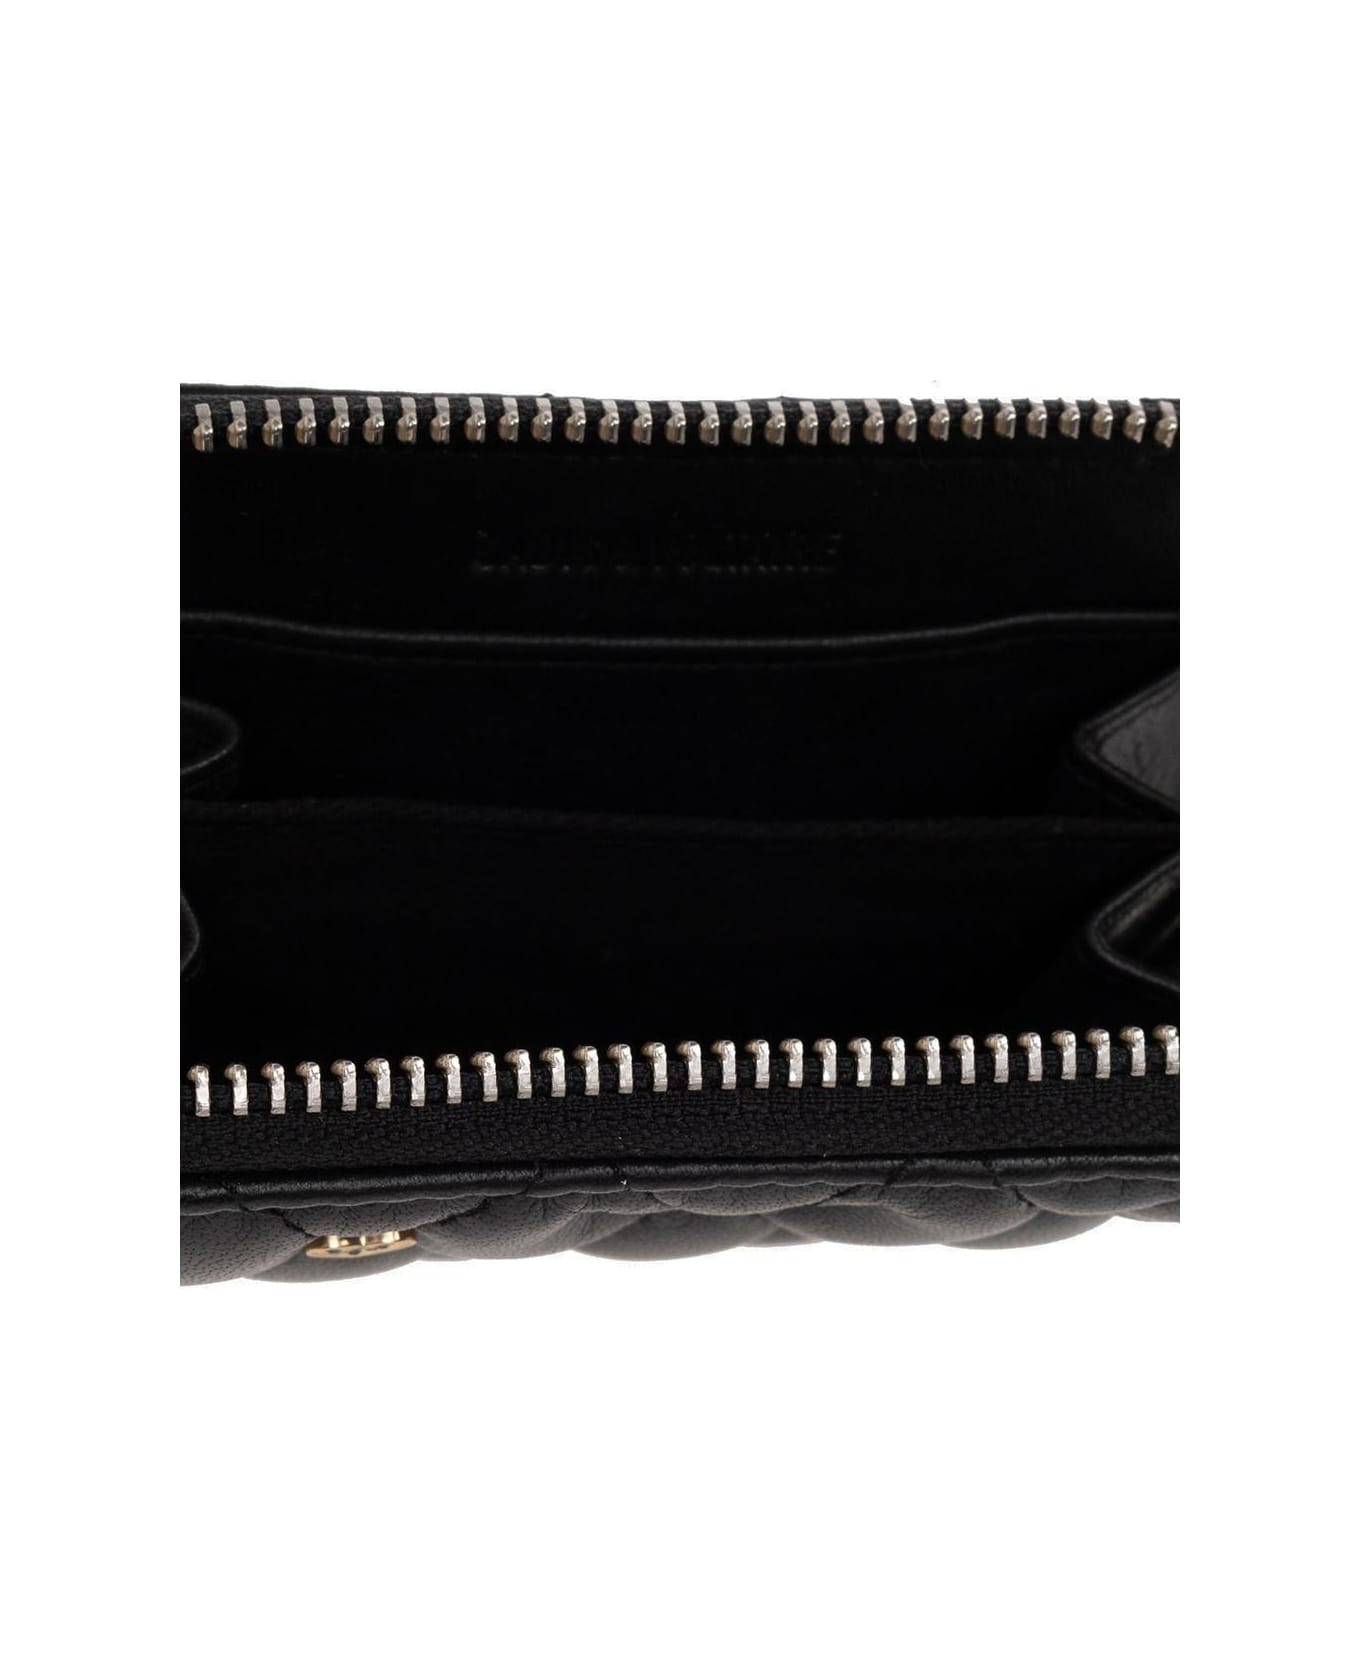 Zadig & Voltaire Studded Mini Coin Purse - Black クラッチバッグ